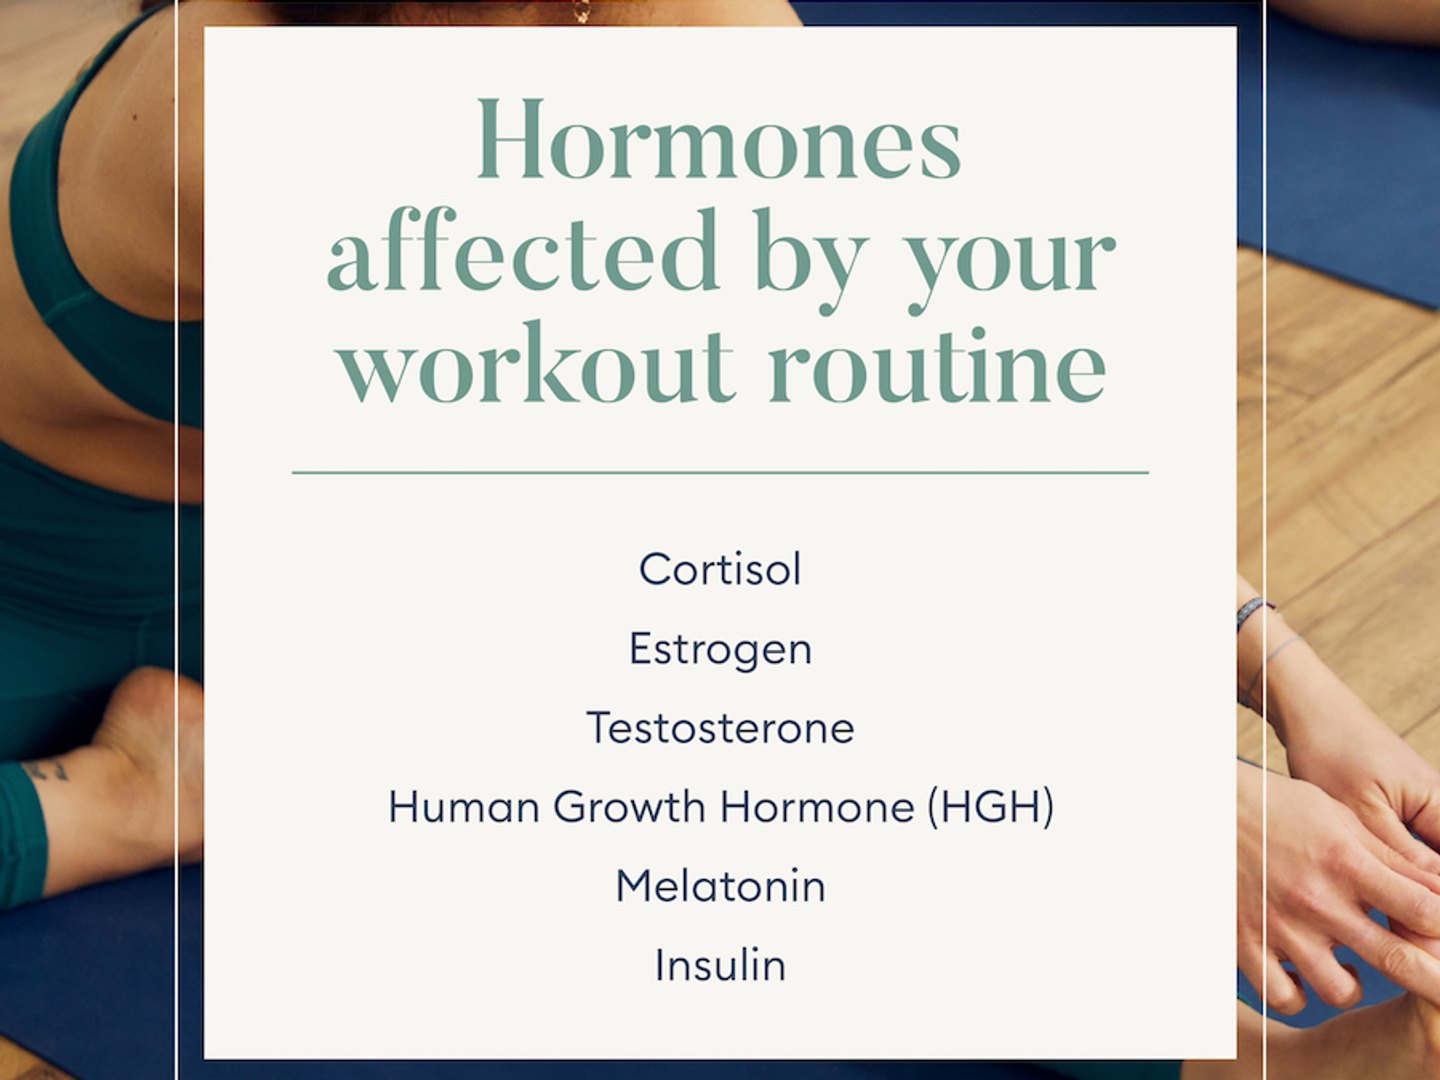 I. Introduction to Hormonal Changes and Exercise